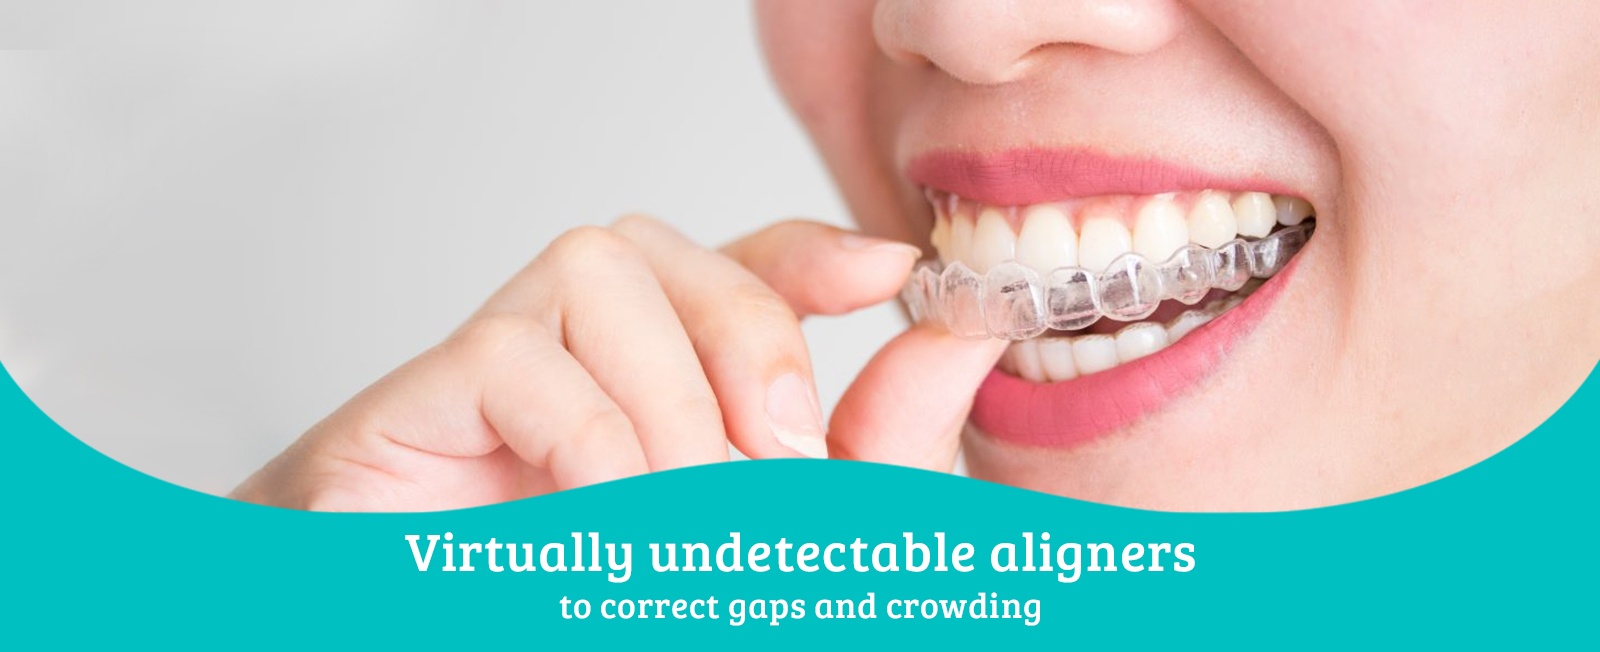 Virtually Undetectable Aligners - Dentistry Services by Dentists in Toronto, ON